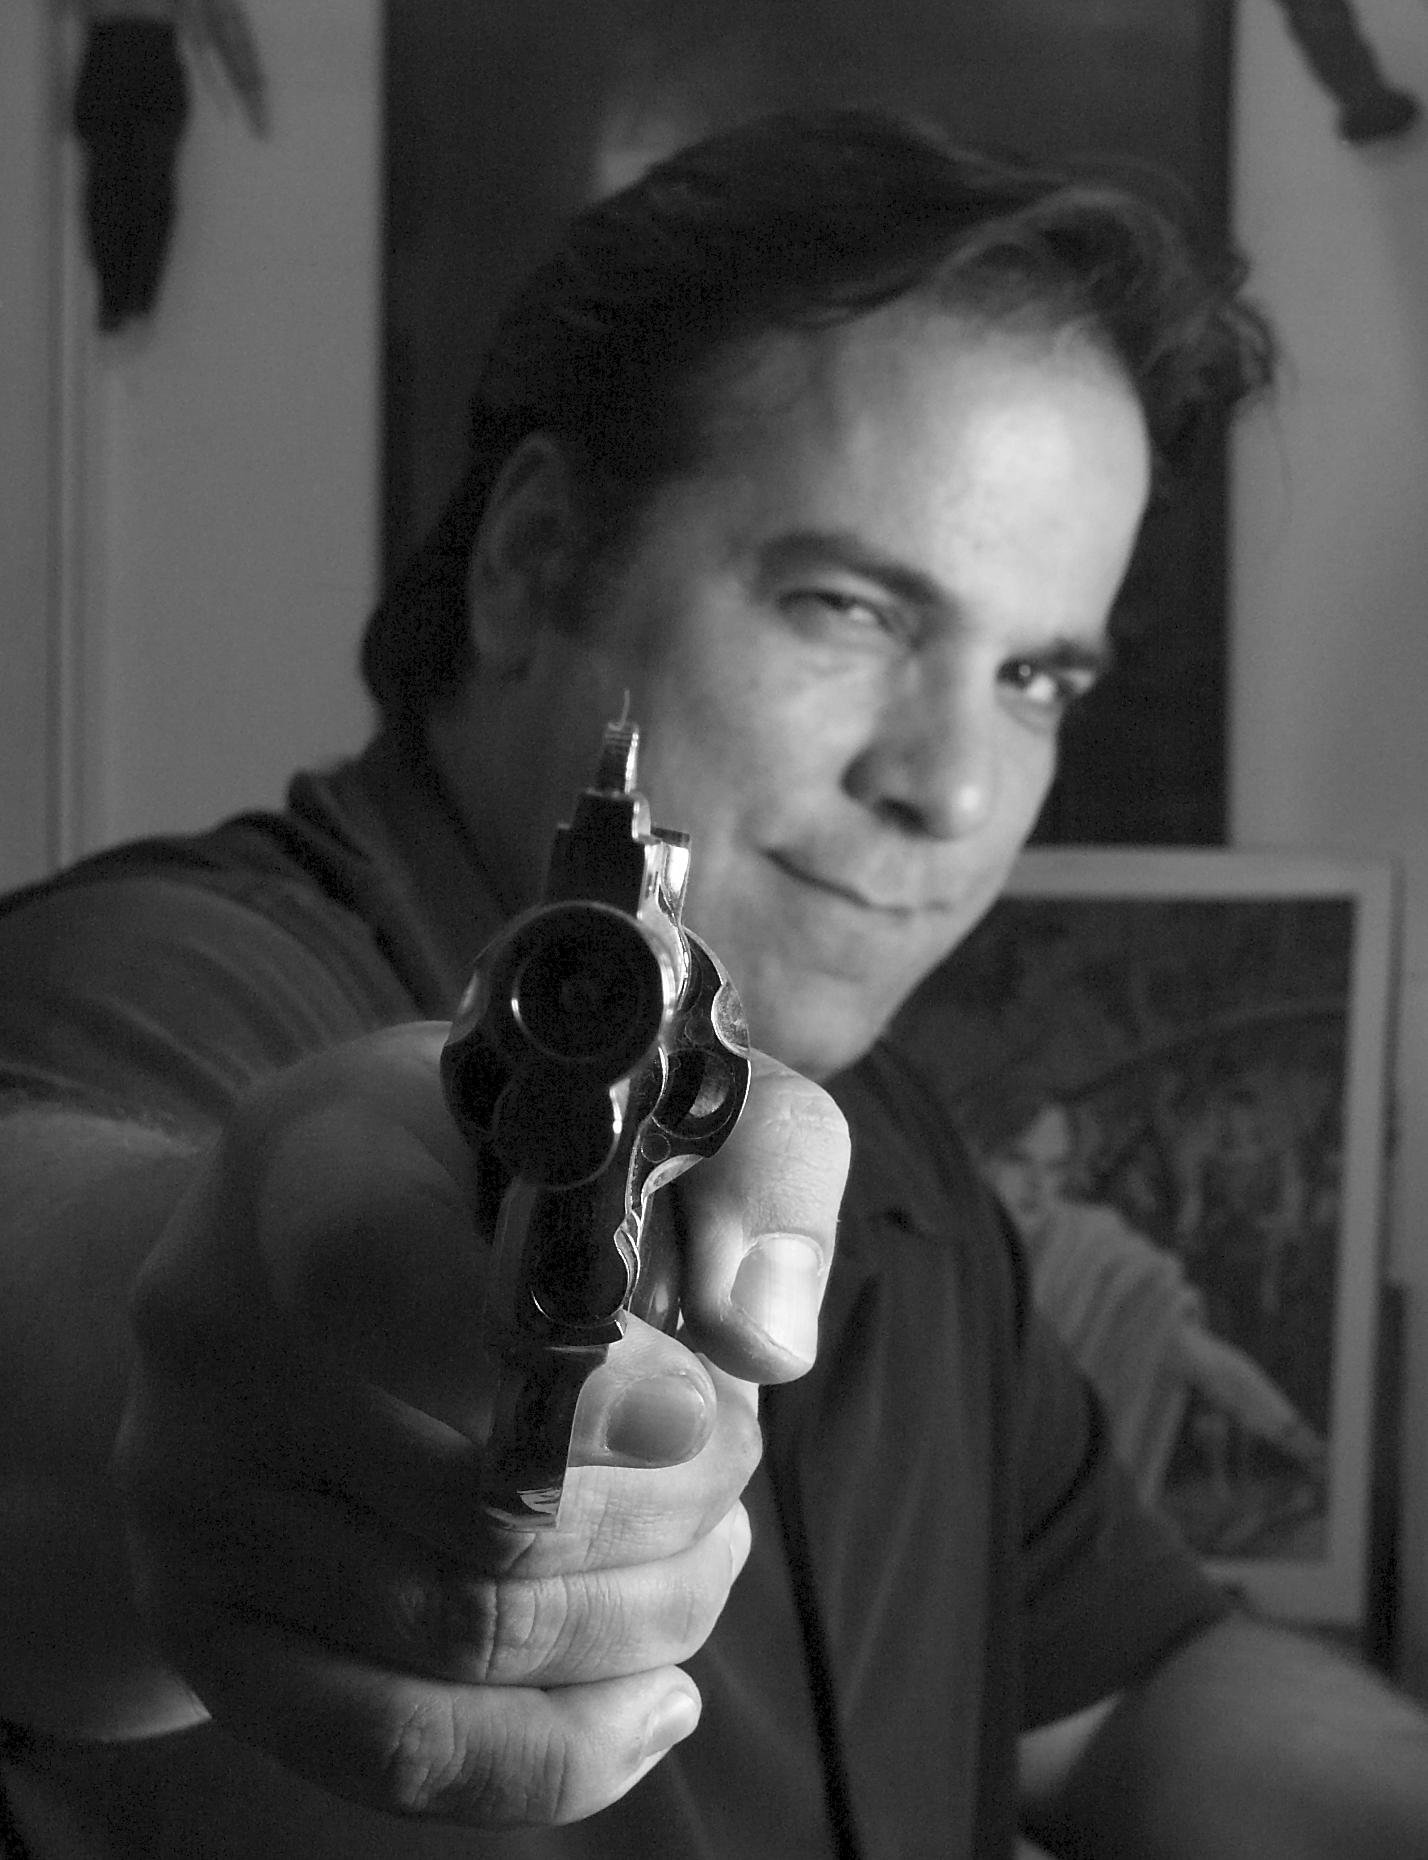 Jimmy Palmiotti at home relaxing.